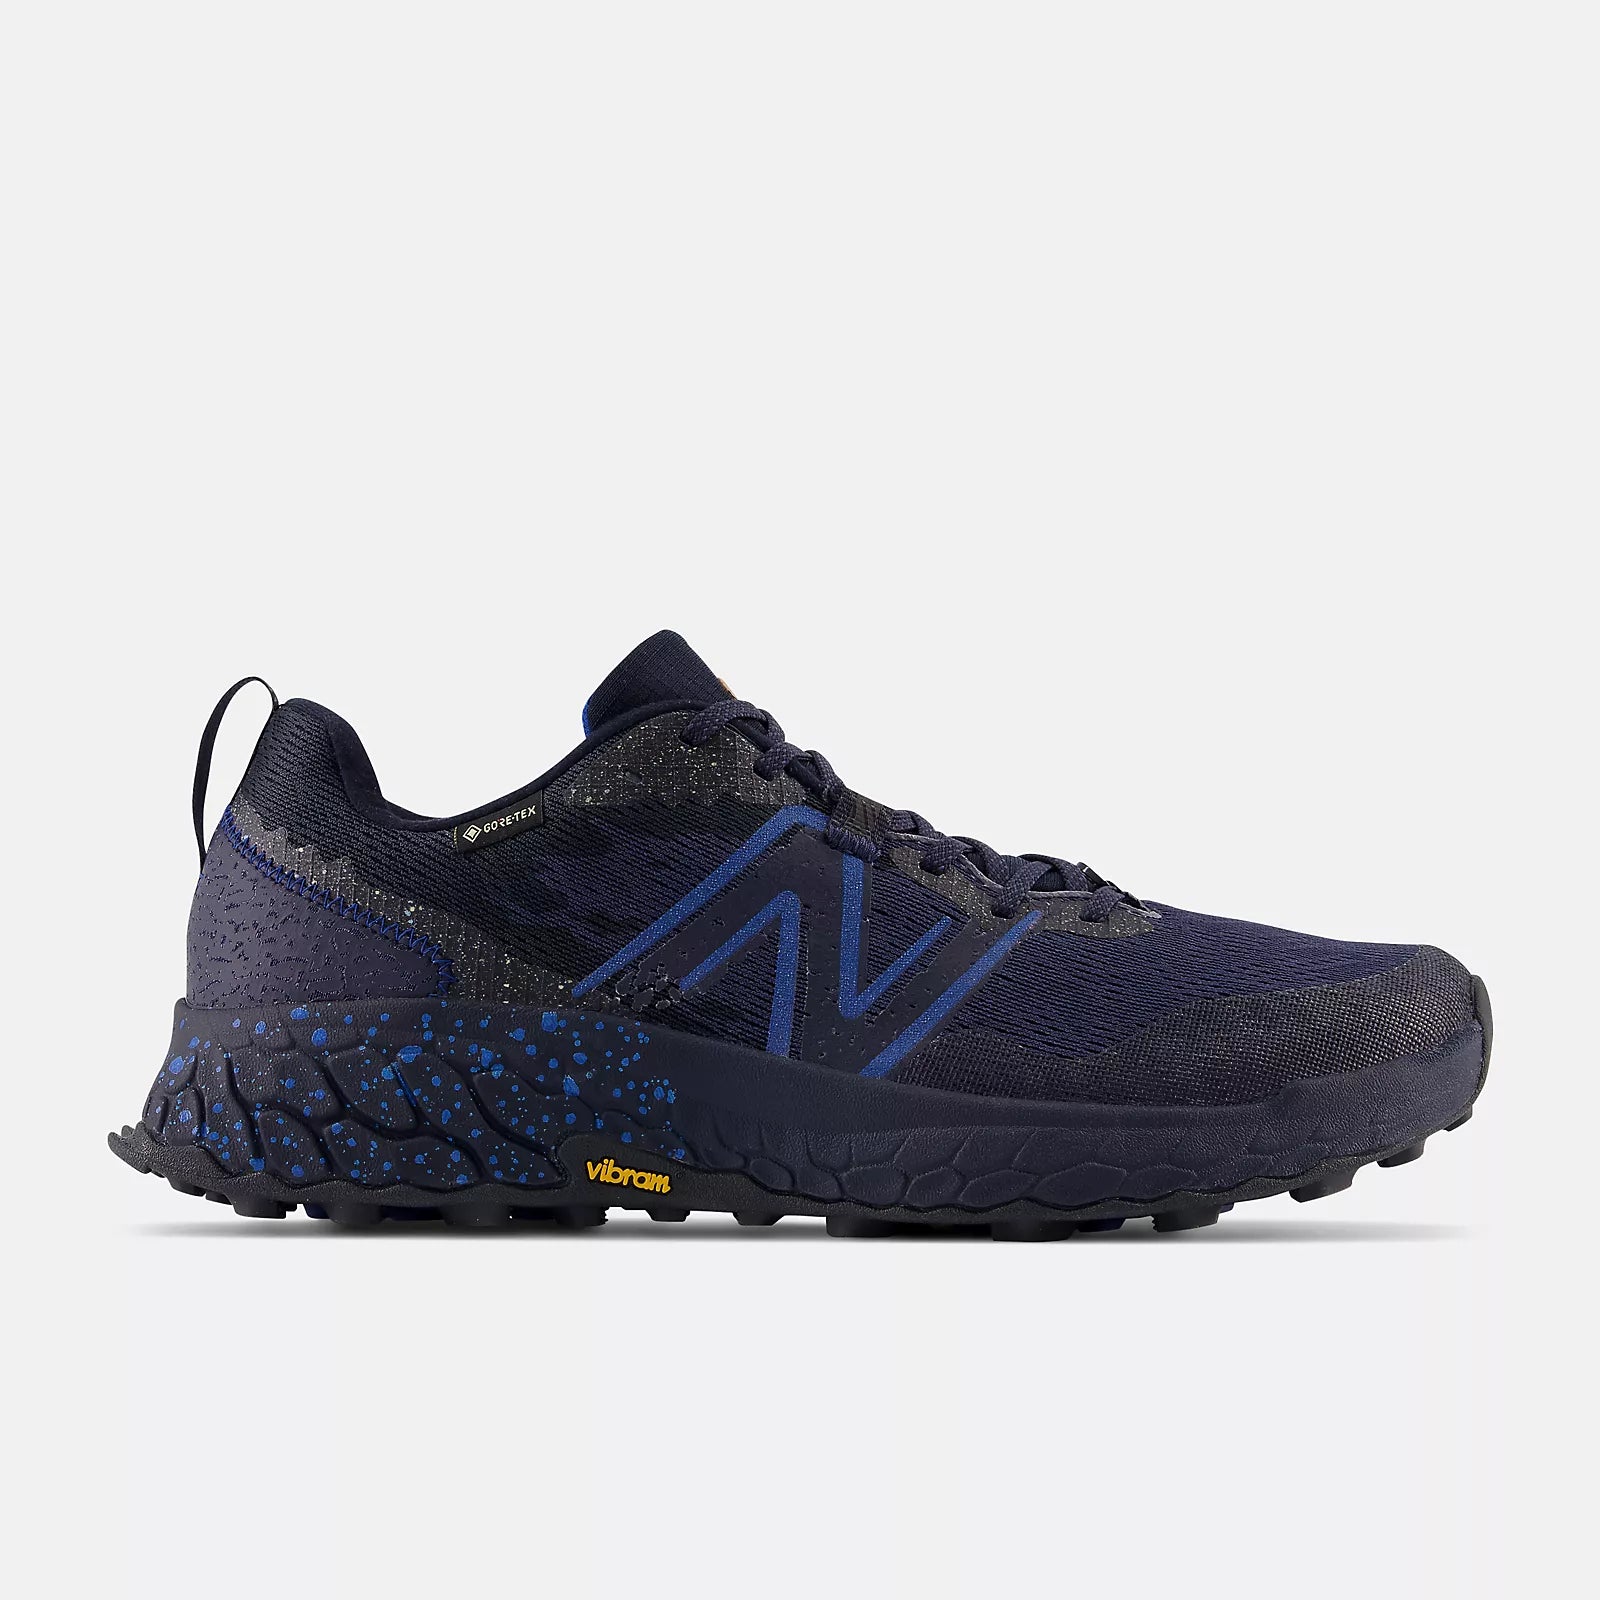 Lateral view of the Men's Hierro V7 Gortex trail runner by New Balance in the color Eclipse/Natural Indigo